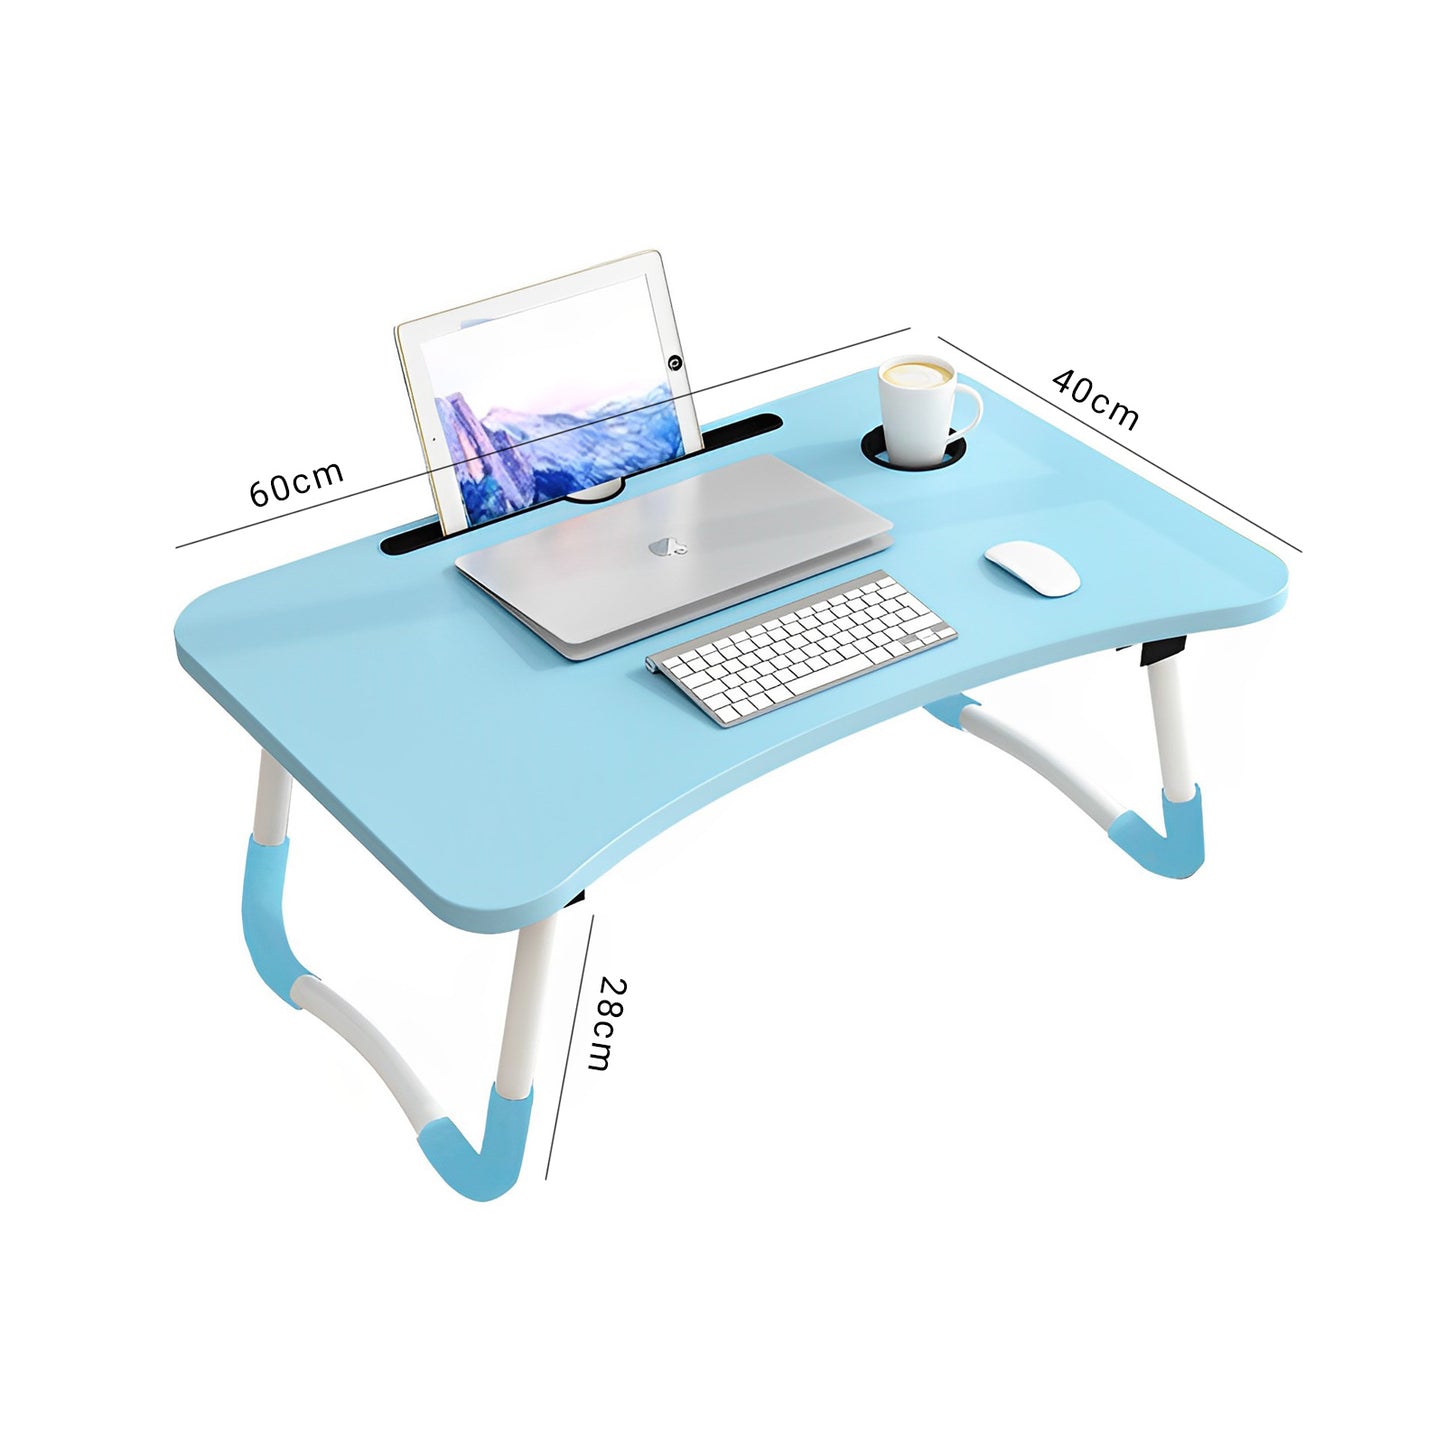 SOGA Blue Portable Bed Table Adjustable Foldable Bed Sofa Study Table Laptop Mini Desk with Notebook Stand Cup Slot Home Decor LUZ-BedTableH303